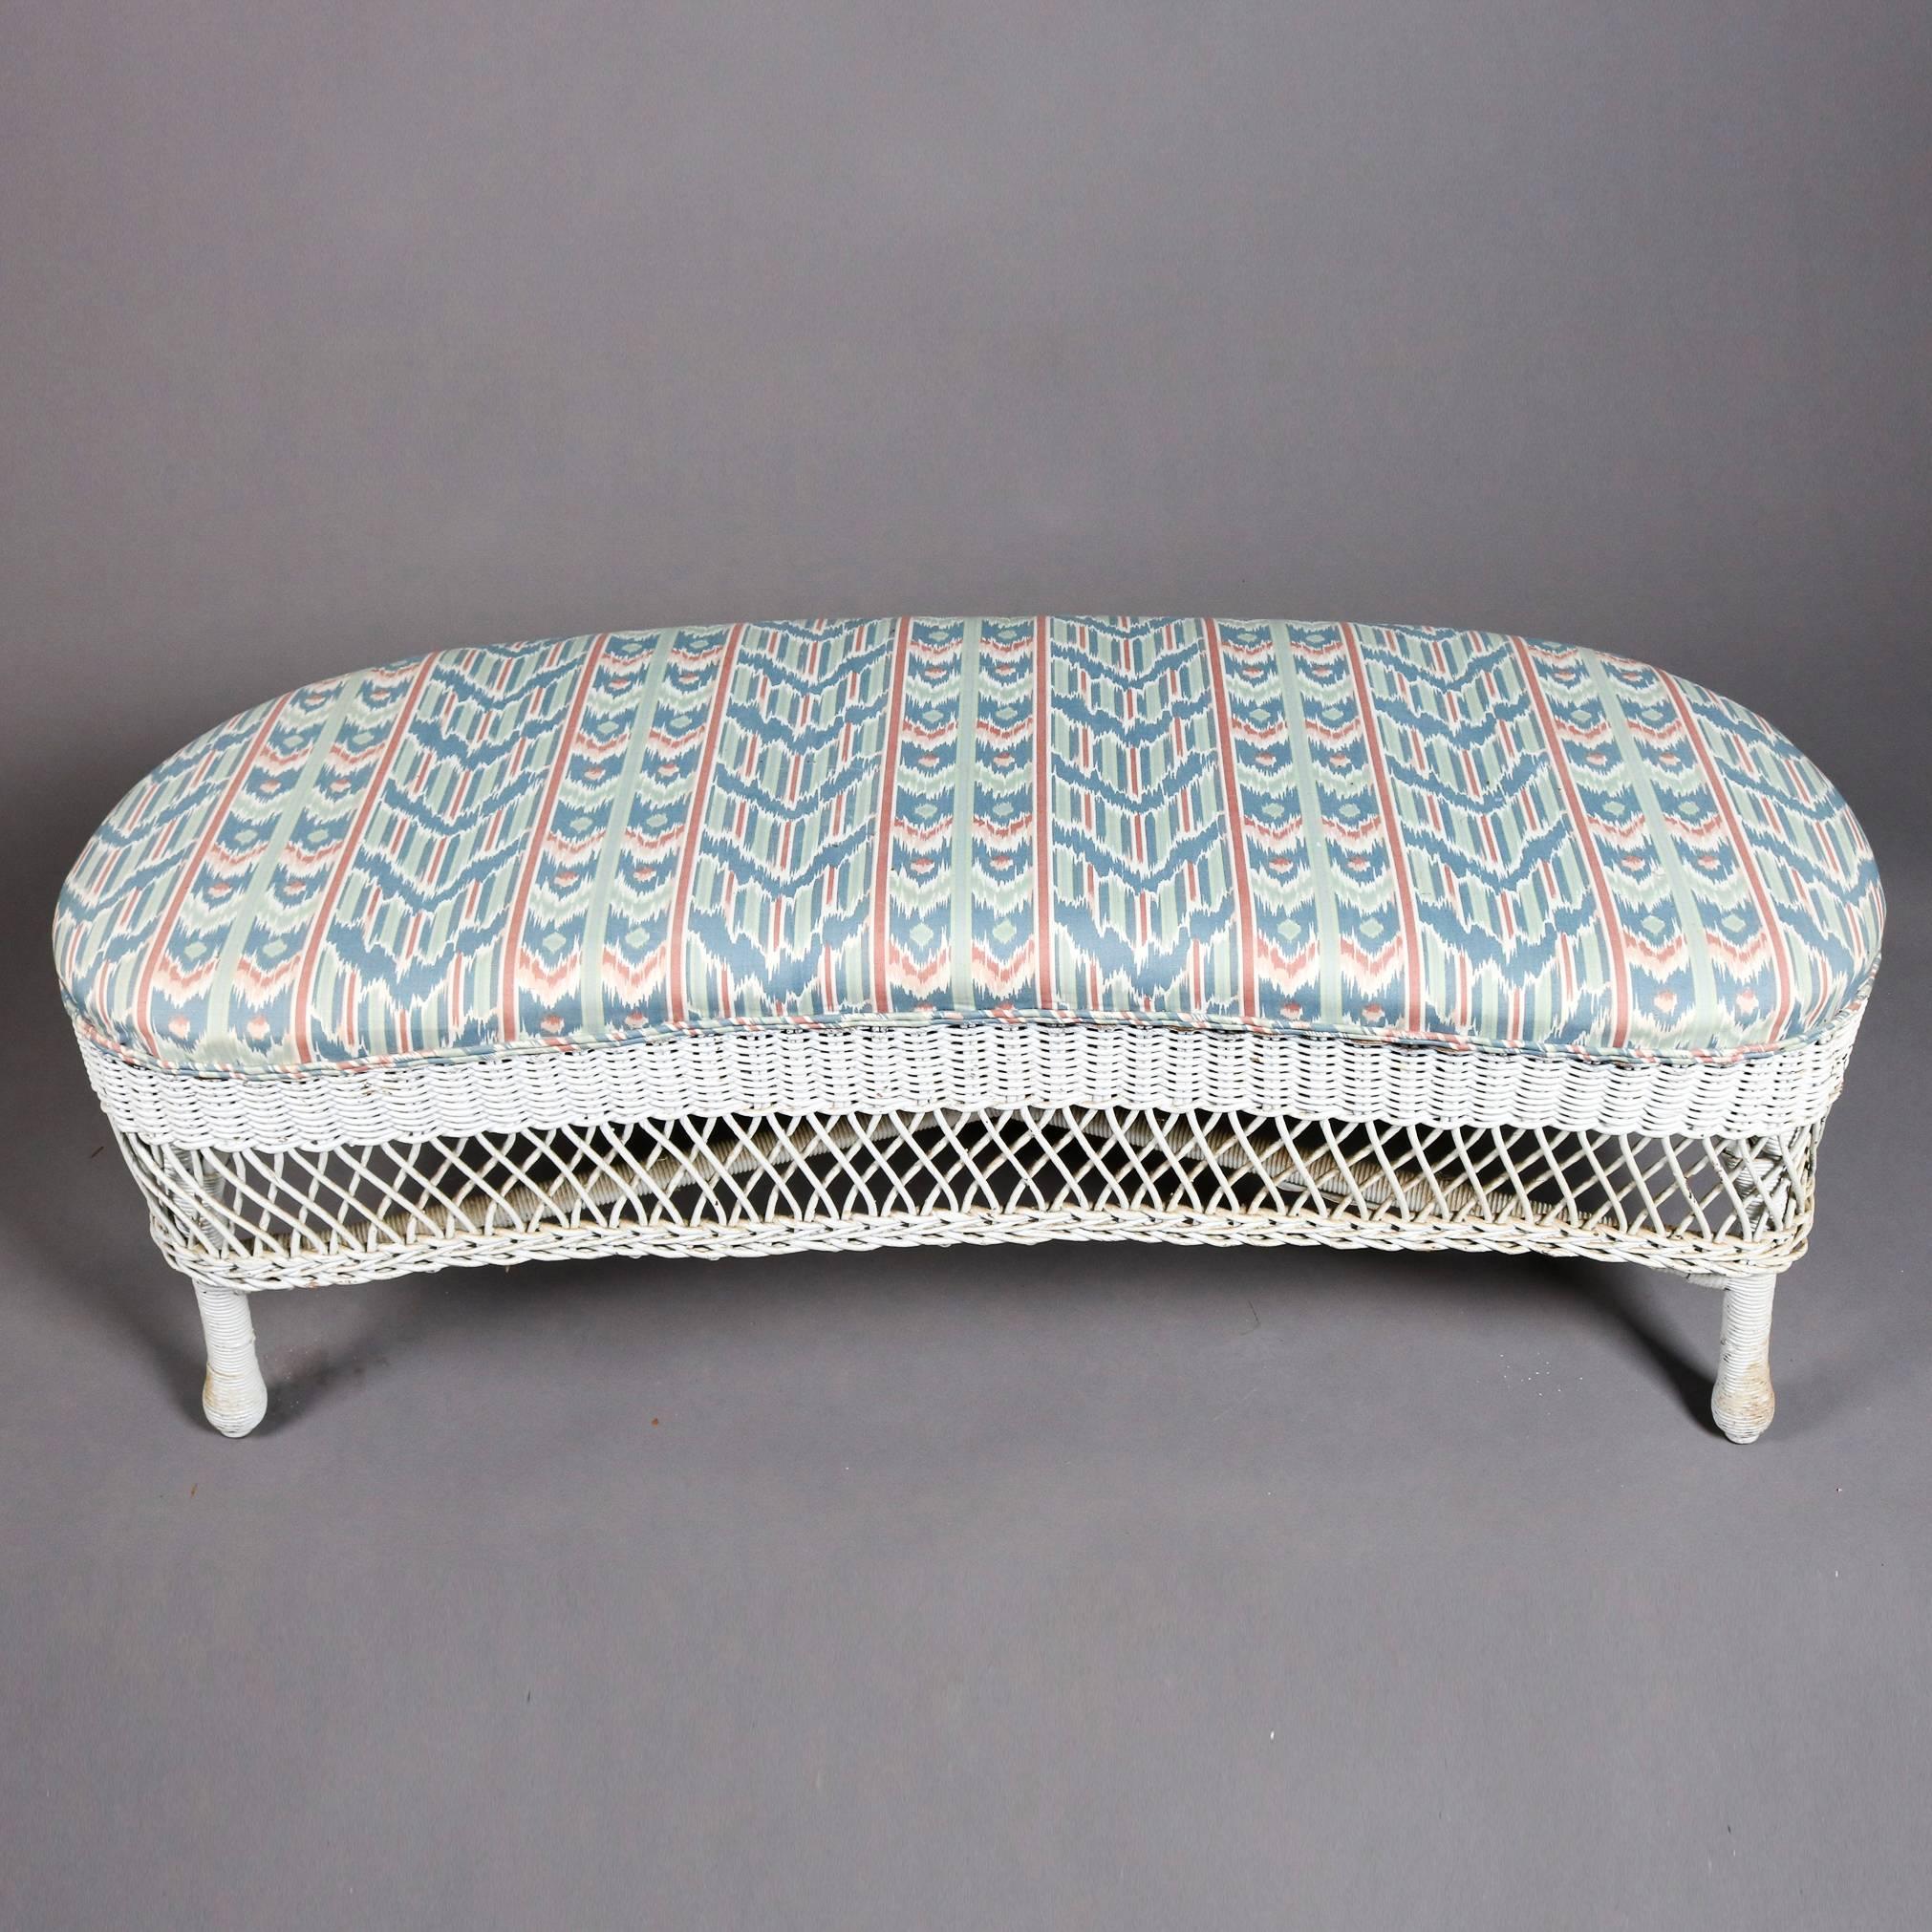 Pair of Heywood Wakefield School white wicker upholstered kidney form benches with upholstered seats, 20th century

Measures: 17